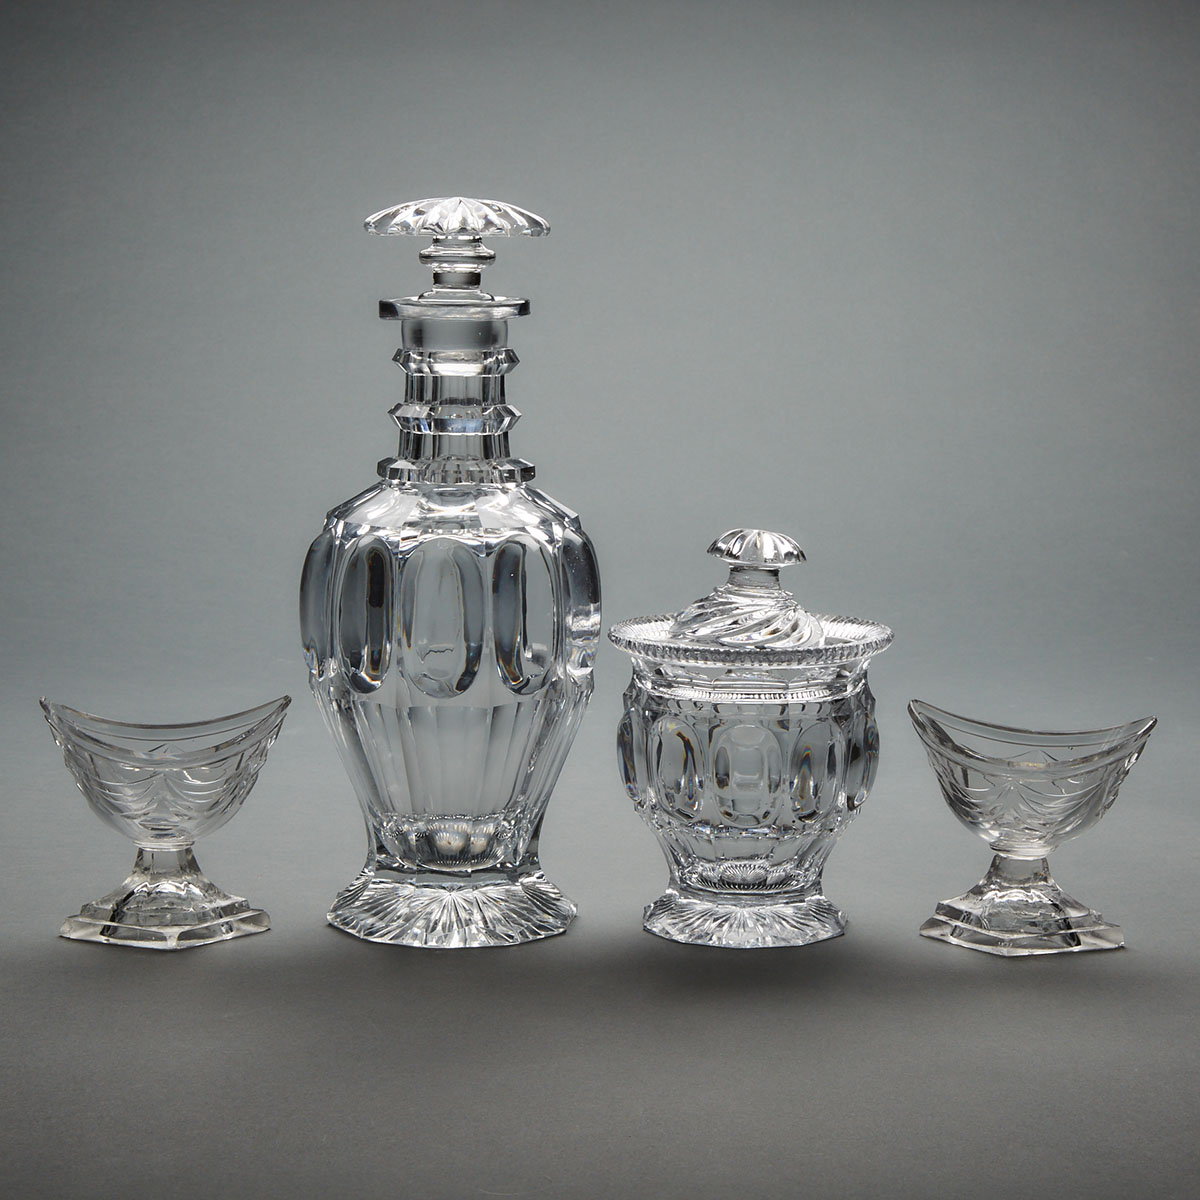 Pair of Anglo-Irish Cut Glass Salt Cellars, Covered Jar and a Decanter, late 18th/early 19th century